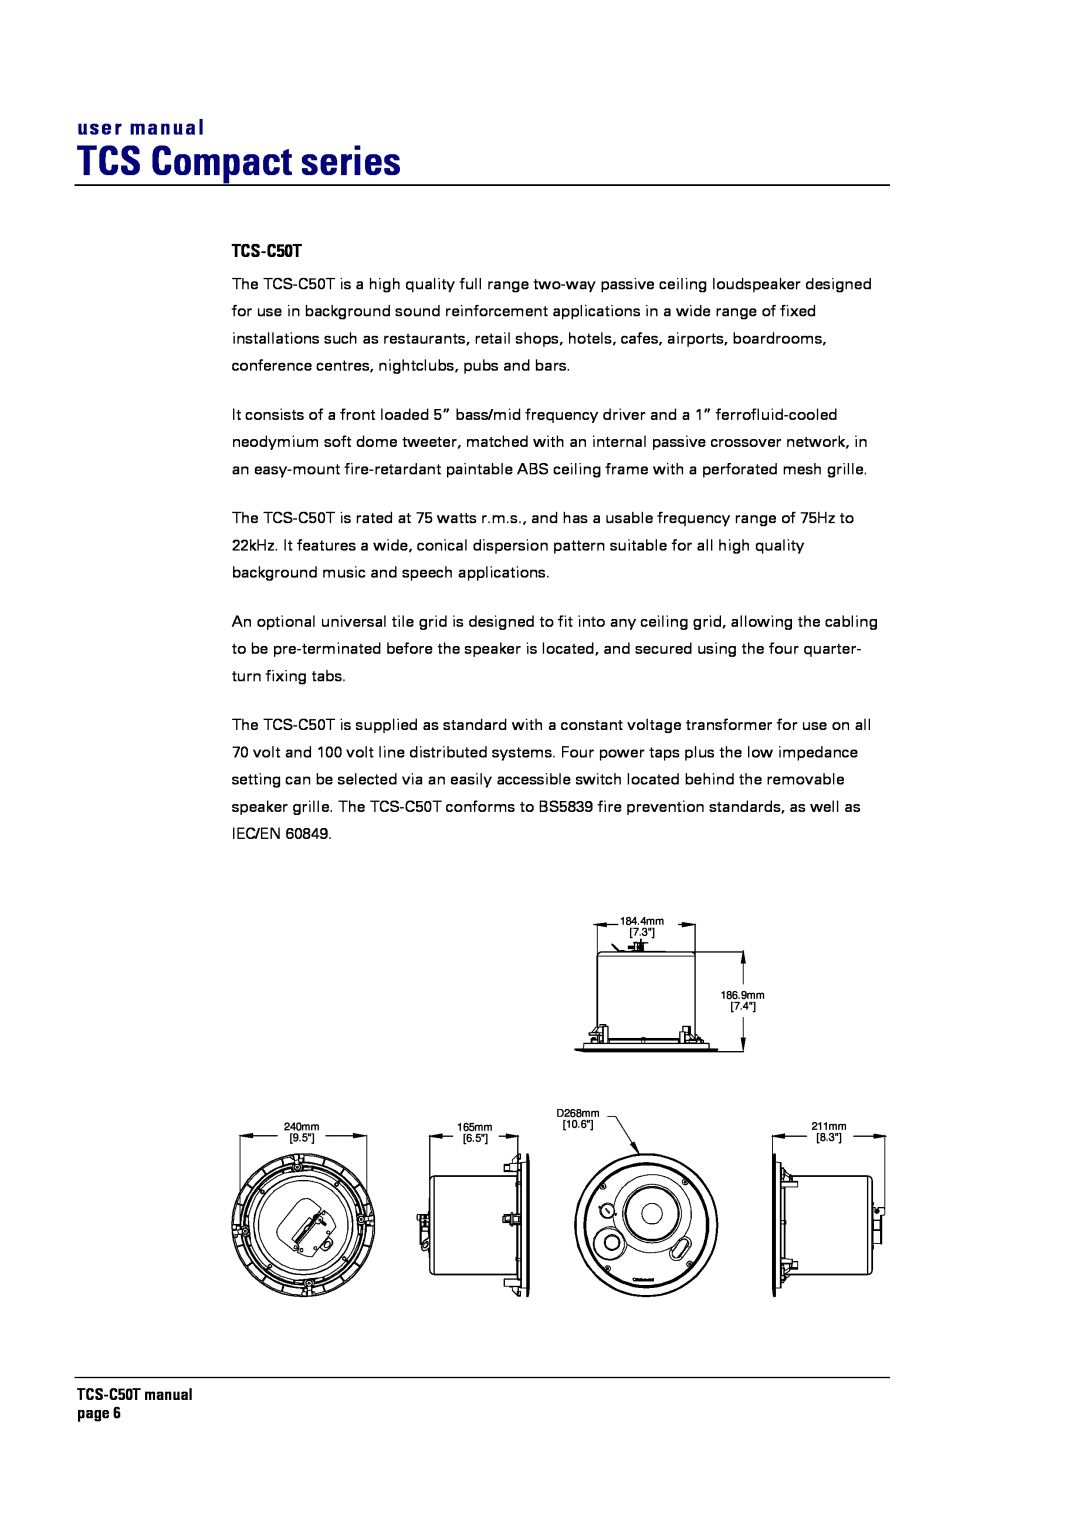 Turbosound user manual TCS Compact series, TCS-C50Tmanual page, 184.4mm 7.3 186.9mm, D268mm, 240mm, 165mm, 10.6, 211mm 